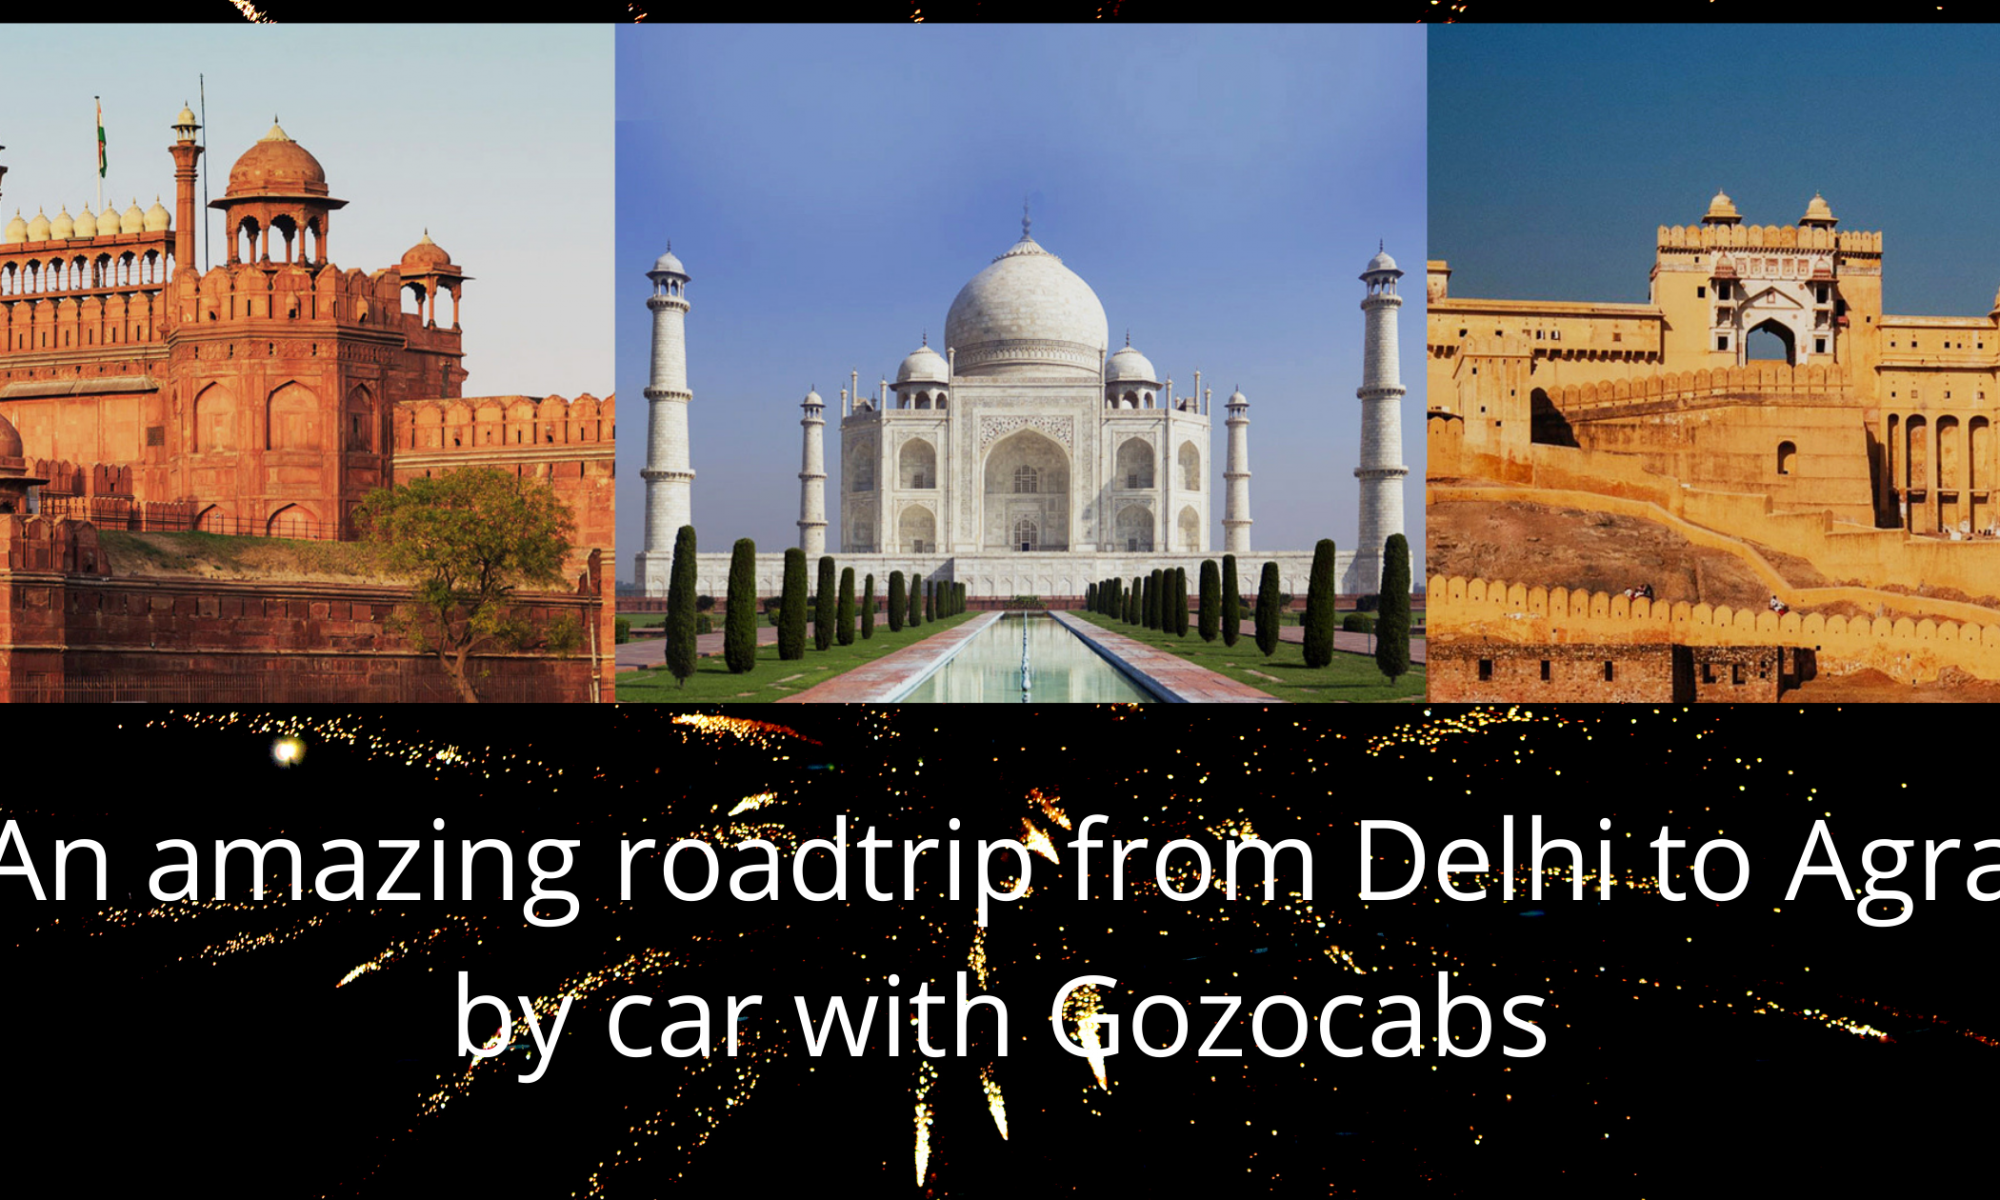 Delhi to Agra road trip by car with Gozocabs